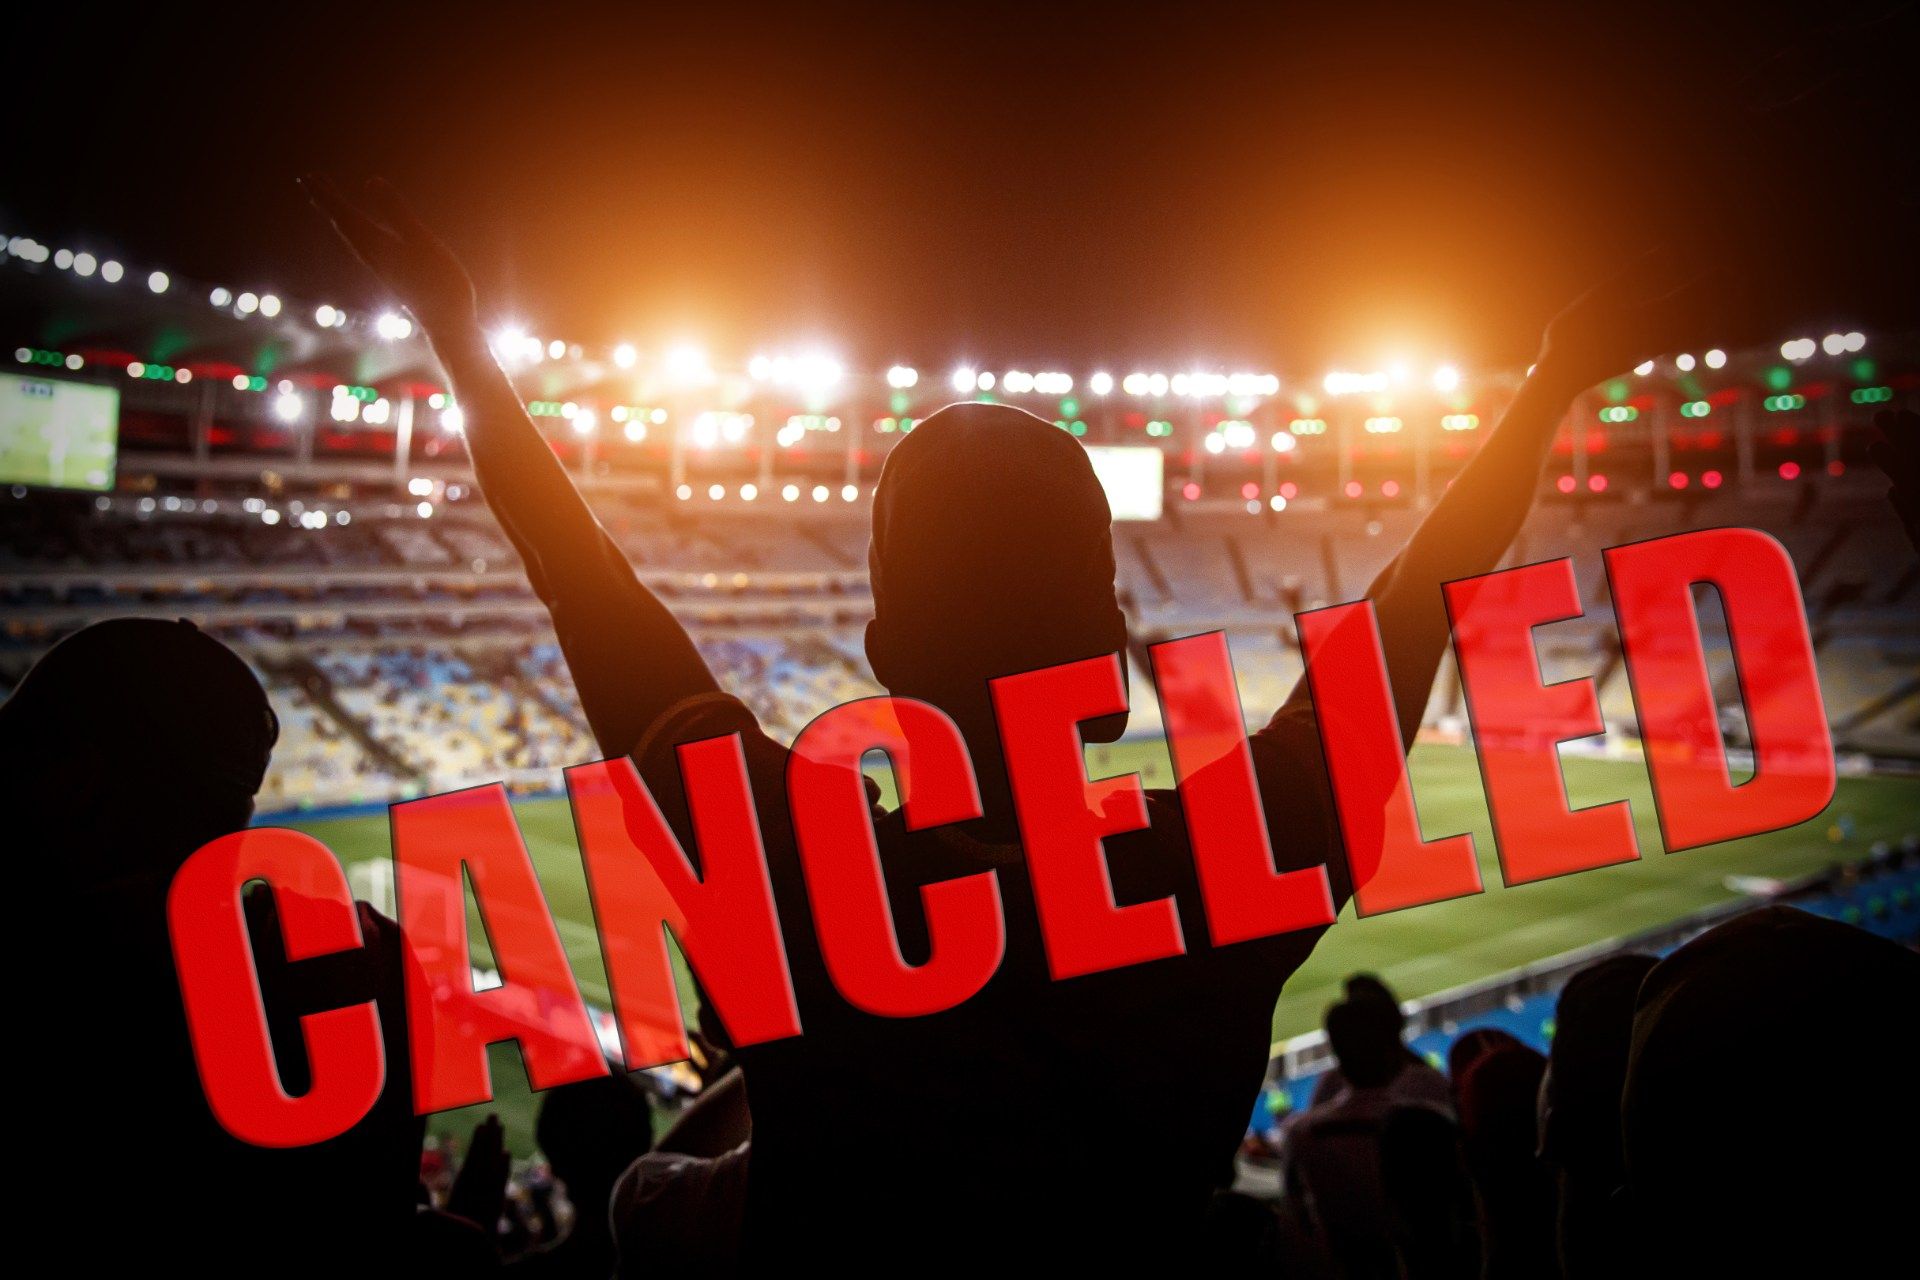 Man cheers at night football game, with the word "cancelled" in red over the photo - Viagogo